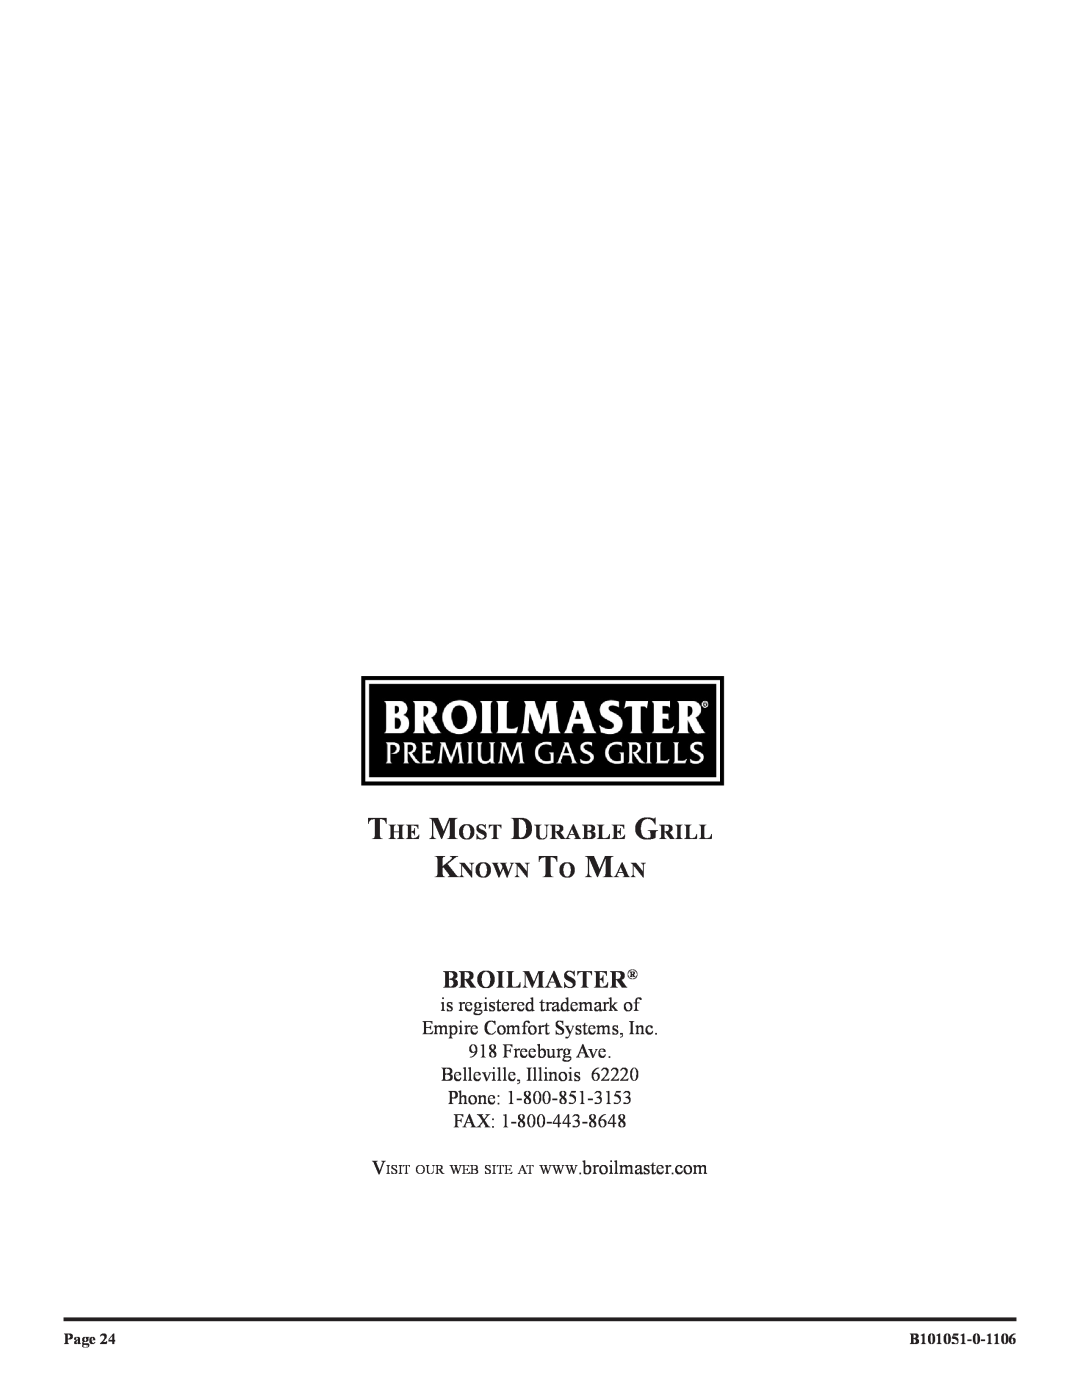 Broilmaster T3CFN-1, T3CN-1 T3CF-1, T3N-1 T3C-1, T3-1 Broilmaster, The Most Durable Grill Known To Man, Page, B101051-0-1106 